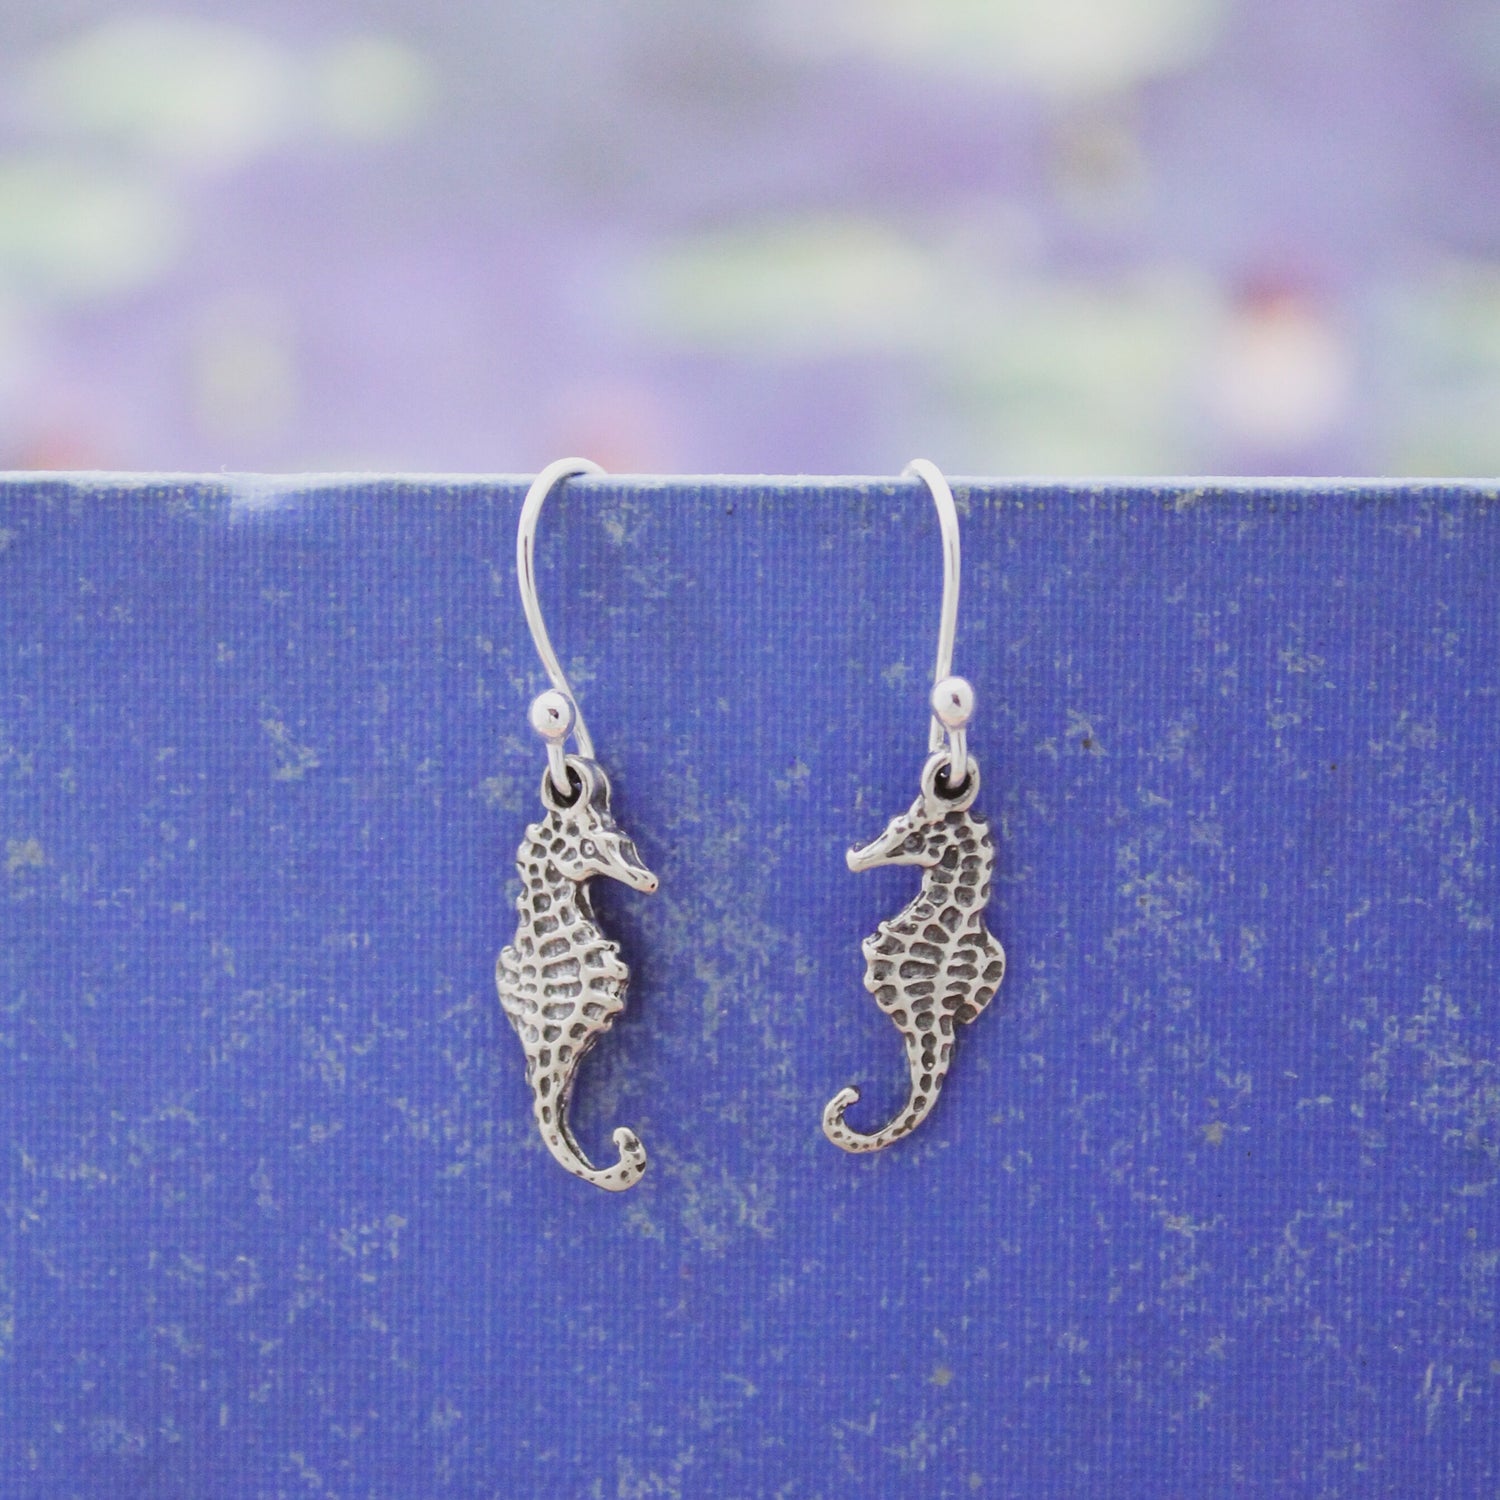 Cute Seahorse Earrings, Sterling Silver Seahorse Beach Jewelry, Marine Life Jewelry, Sterling Silver Shore Jewelry Gift, Gifts for Her